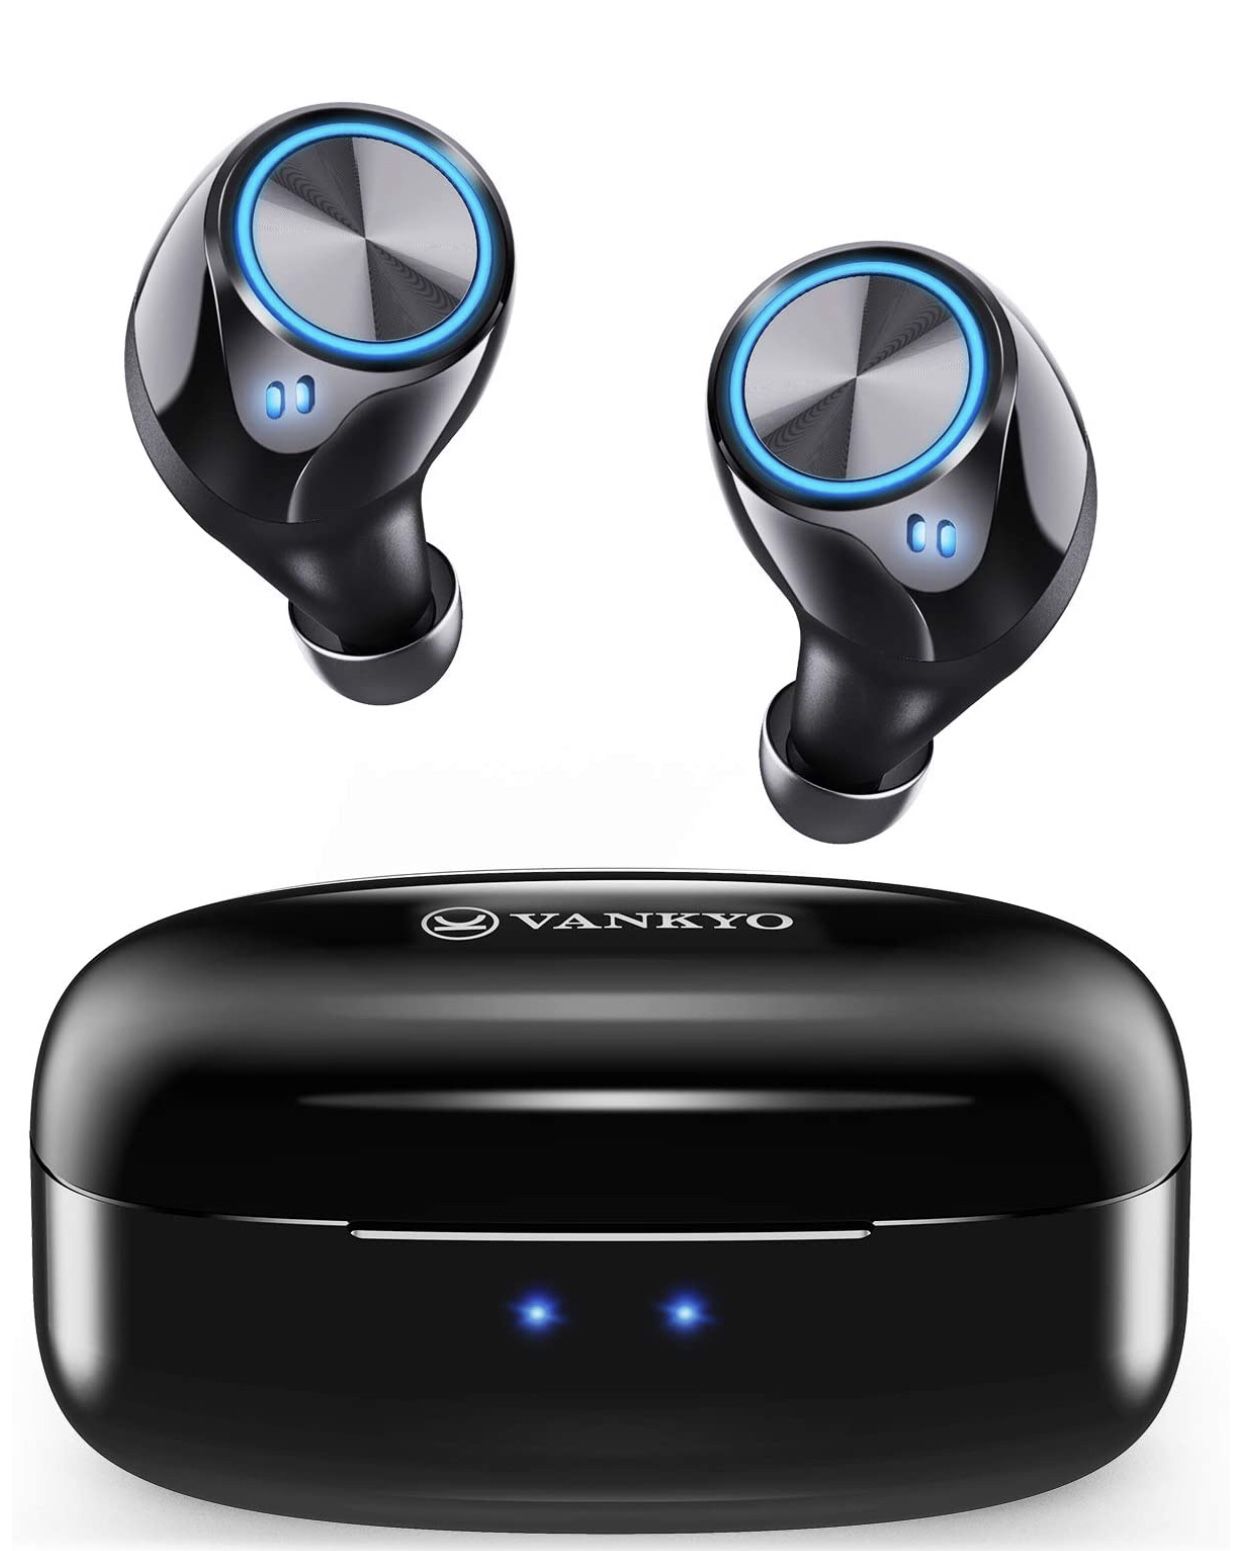 VANKYO Wireless Earbuds X180 in-Ear Bluetooth 5.0 Earphones for iPhone Android with USB-C Charging Case, IPX7 Waterproof Sport Headphones with Mic, T